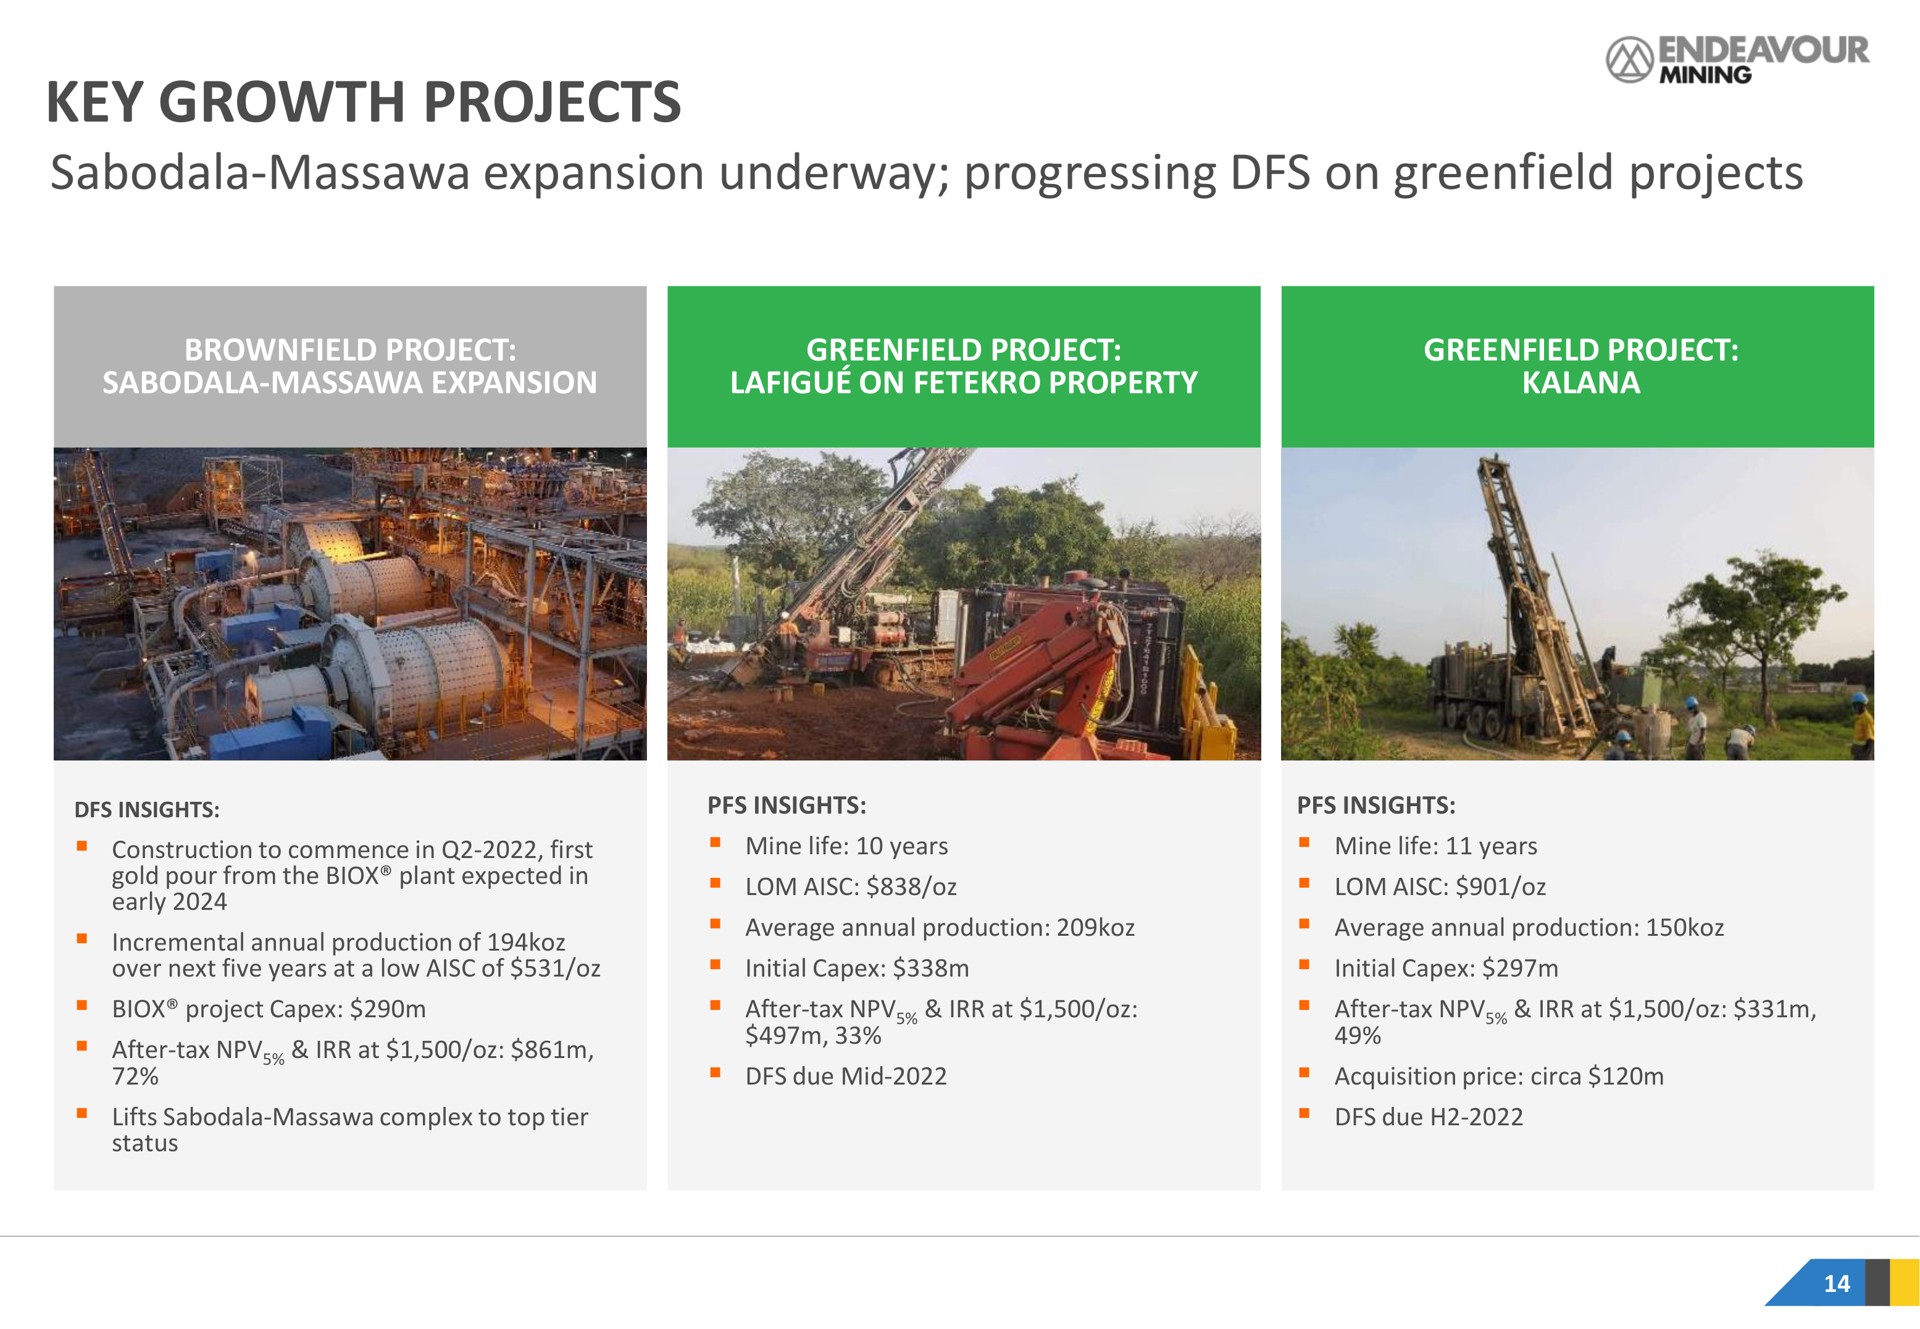 key growth projects expansion underway progressing on projects key | Endeavour Mining